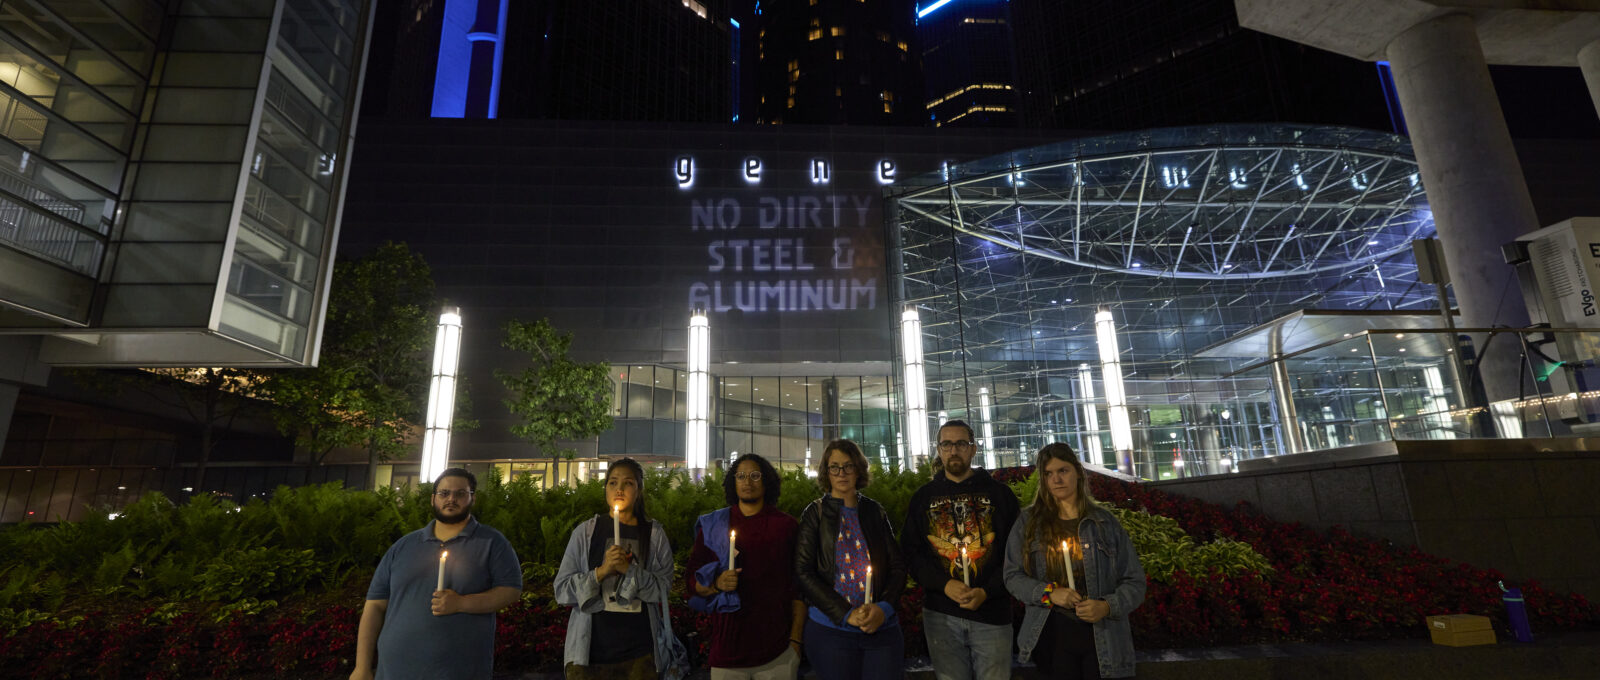 Candlelit vigil in front of GM's HQ with projections on dirty steel and aluminum behind.